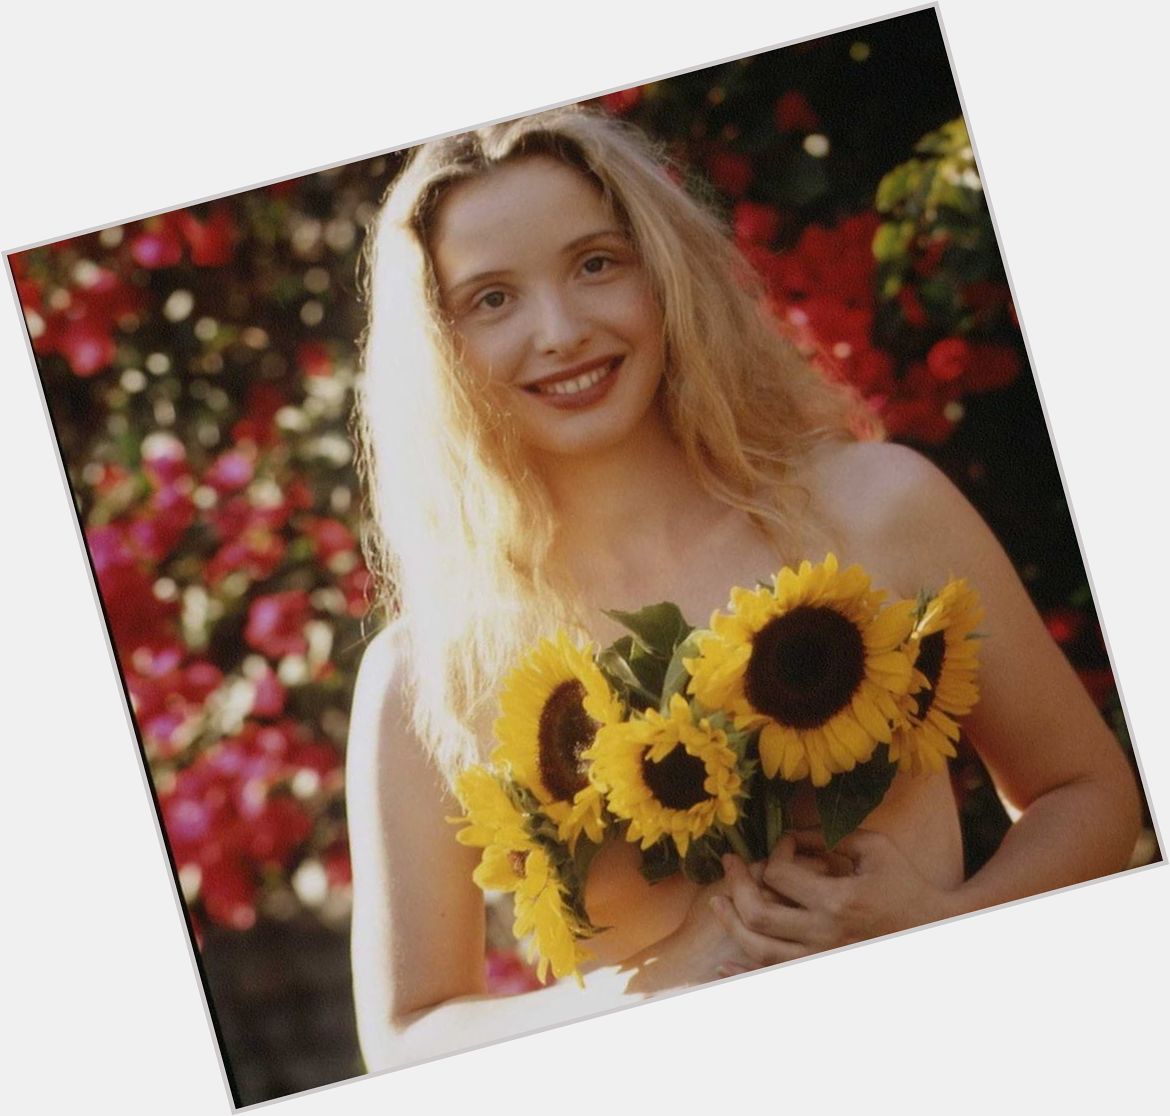 Happy Birthday to Julie Delpy who turns 50 today! 